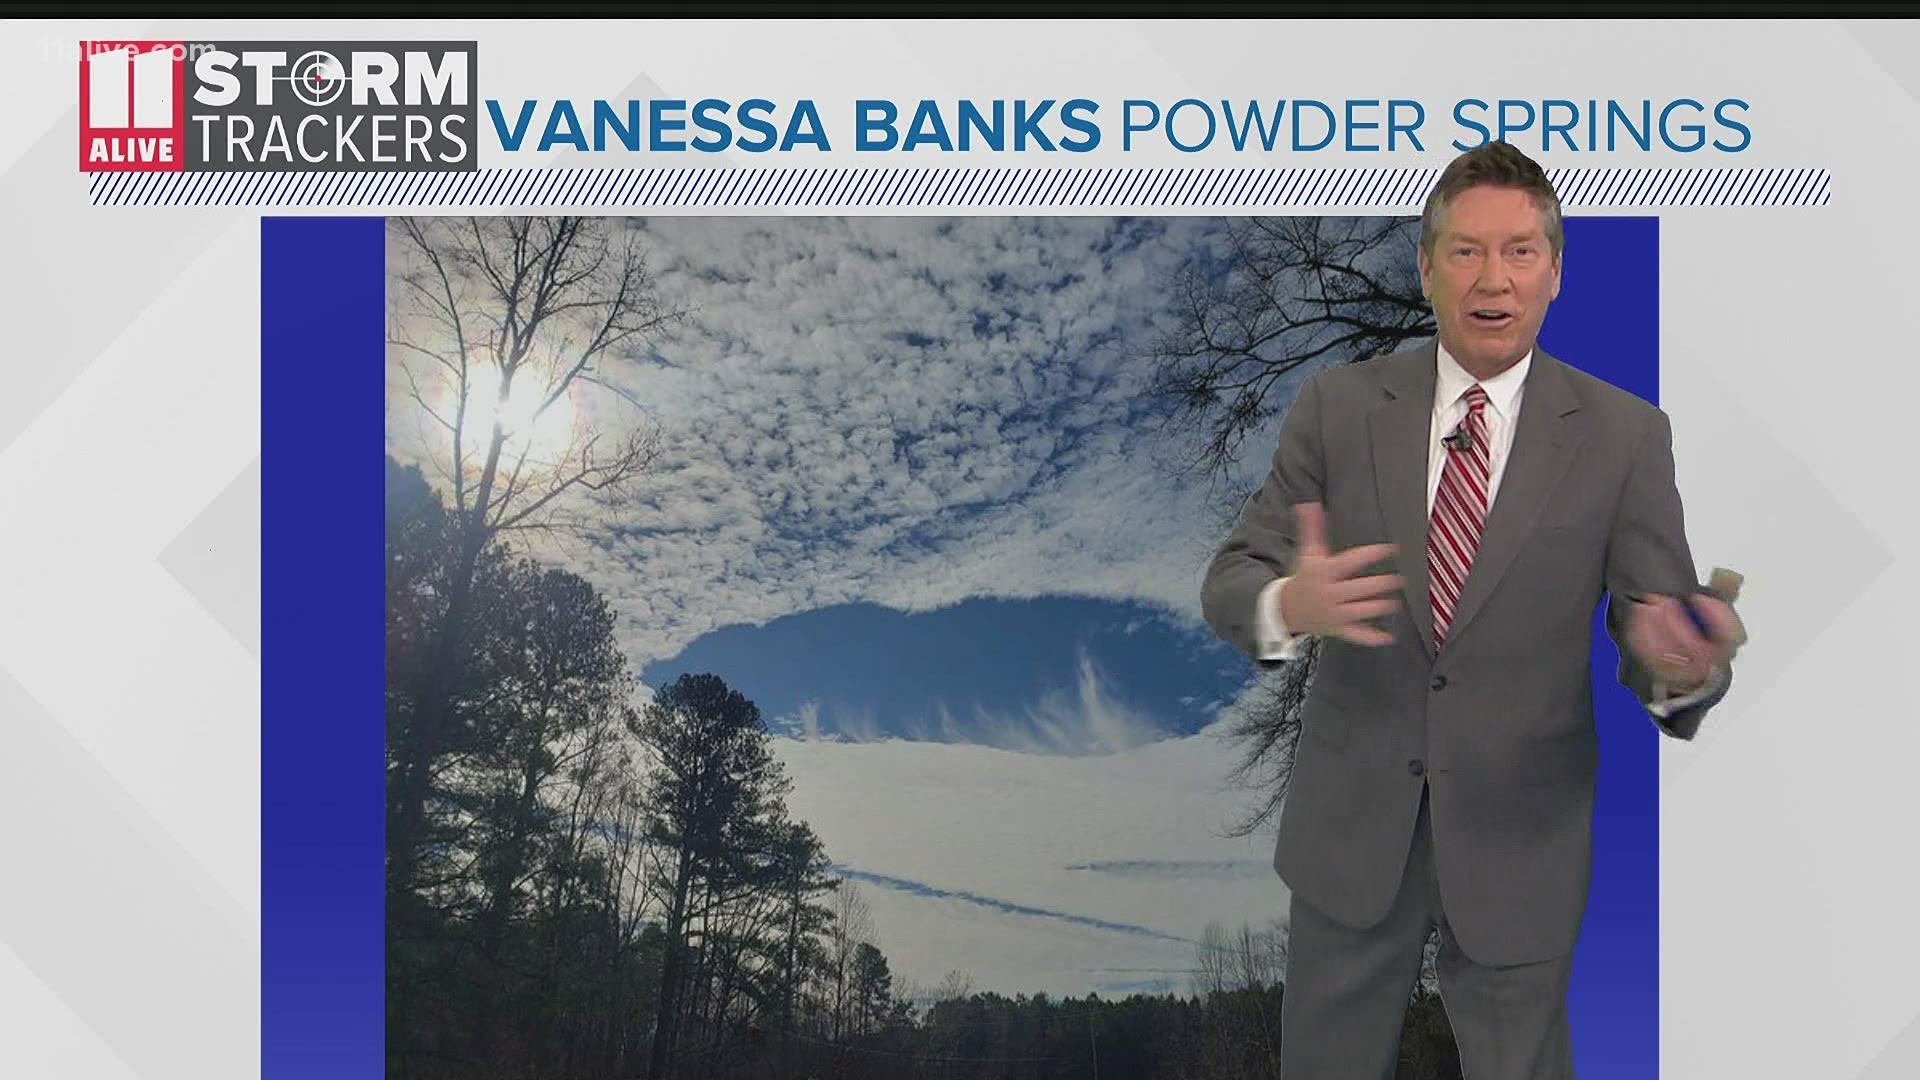 Hole punch clouds were seen across North Georgia Friday